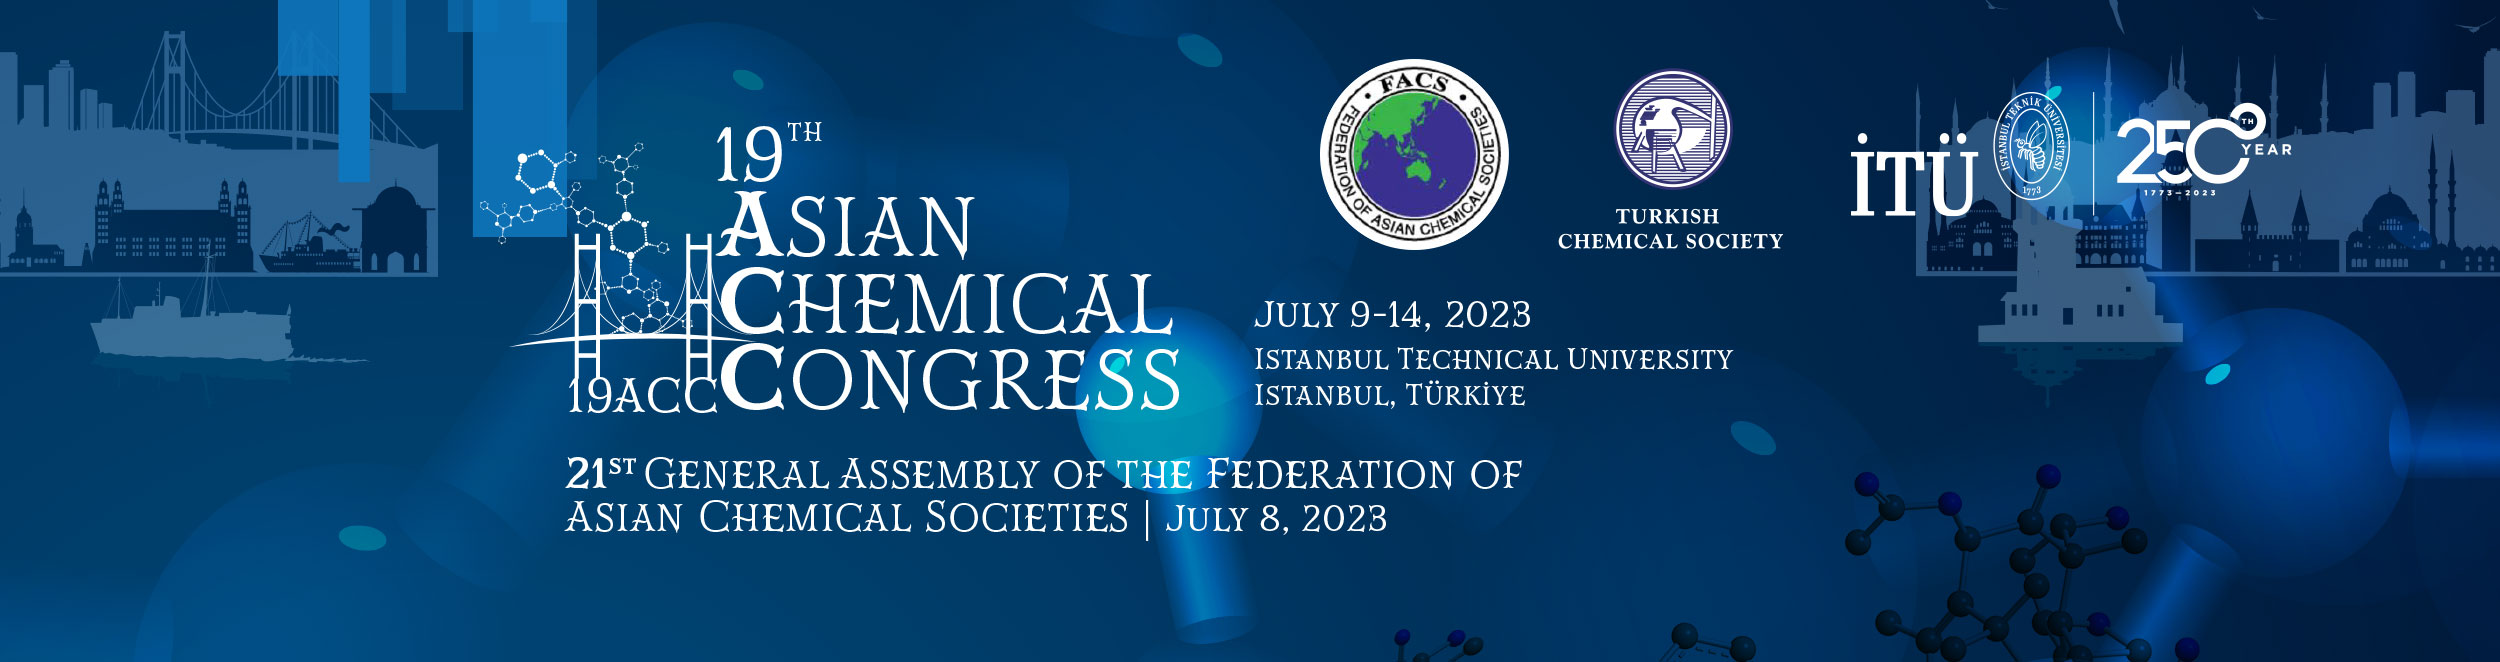 Asiachem – 19th Asian Chemical Congress